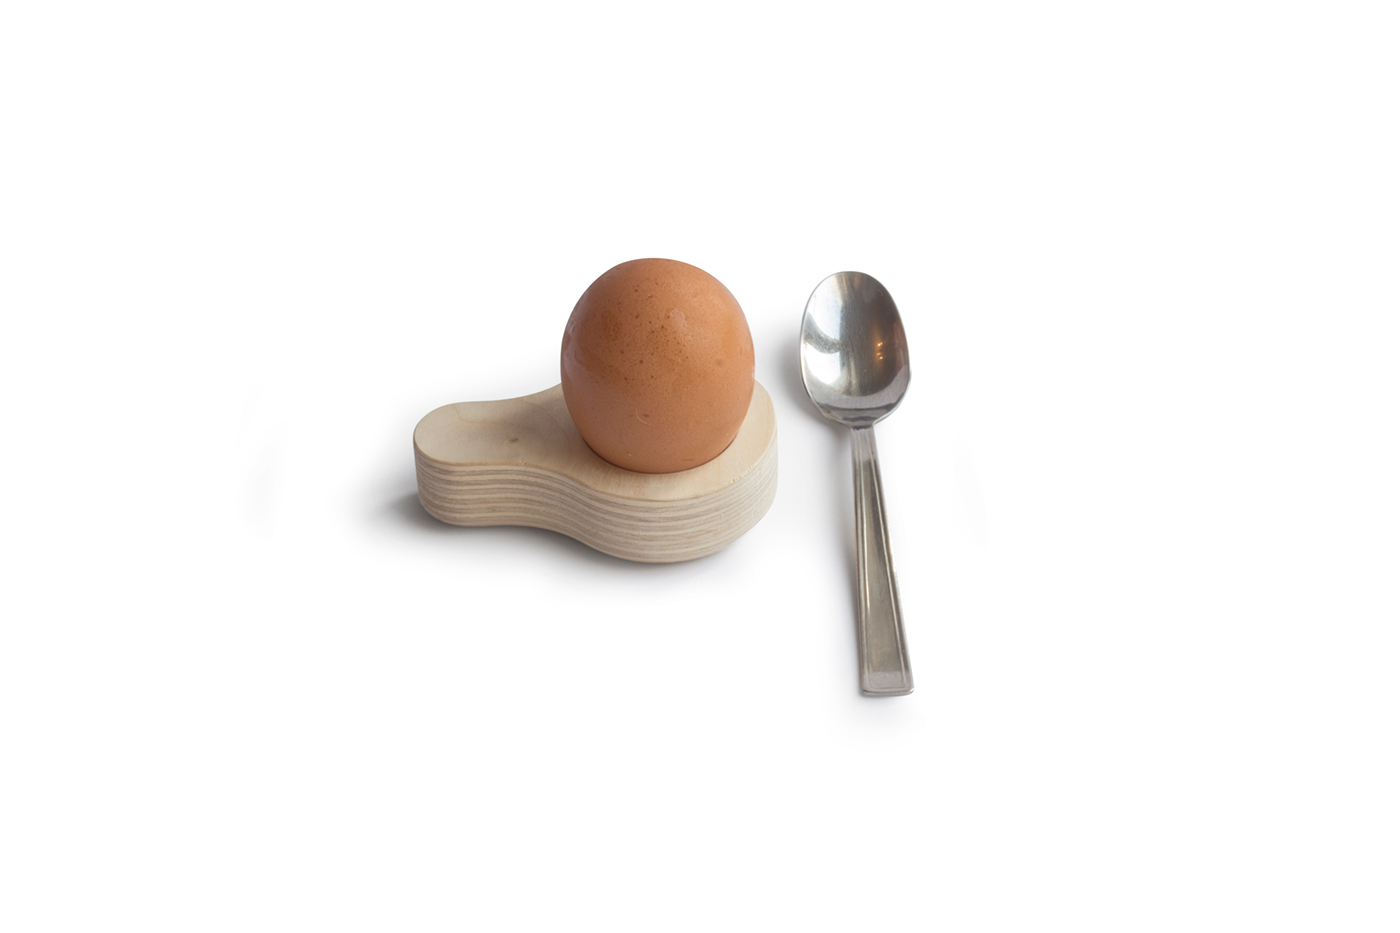 digital connection Physical connection numerical control machine egg holder contact essential simple clean italian crafted craft